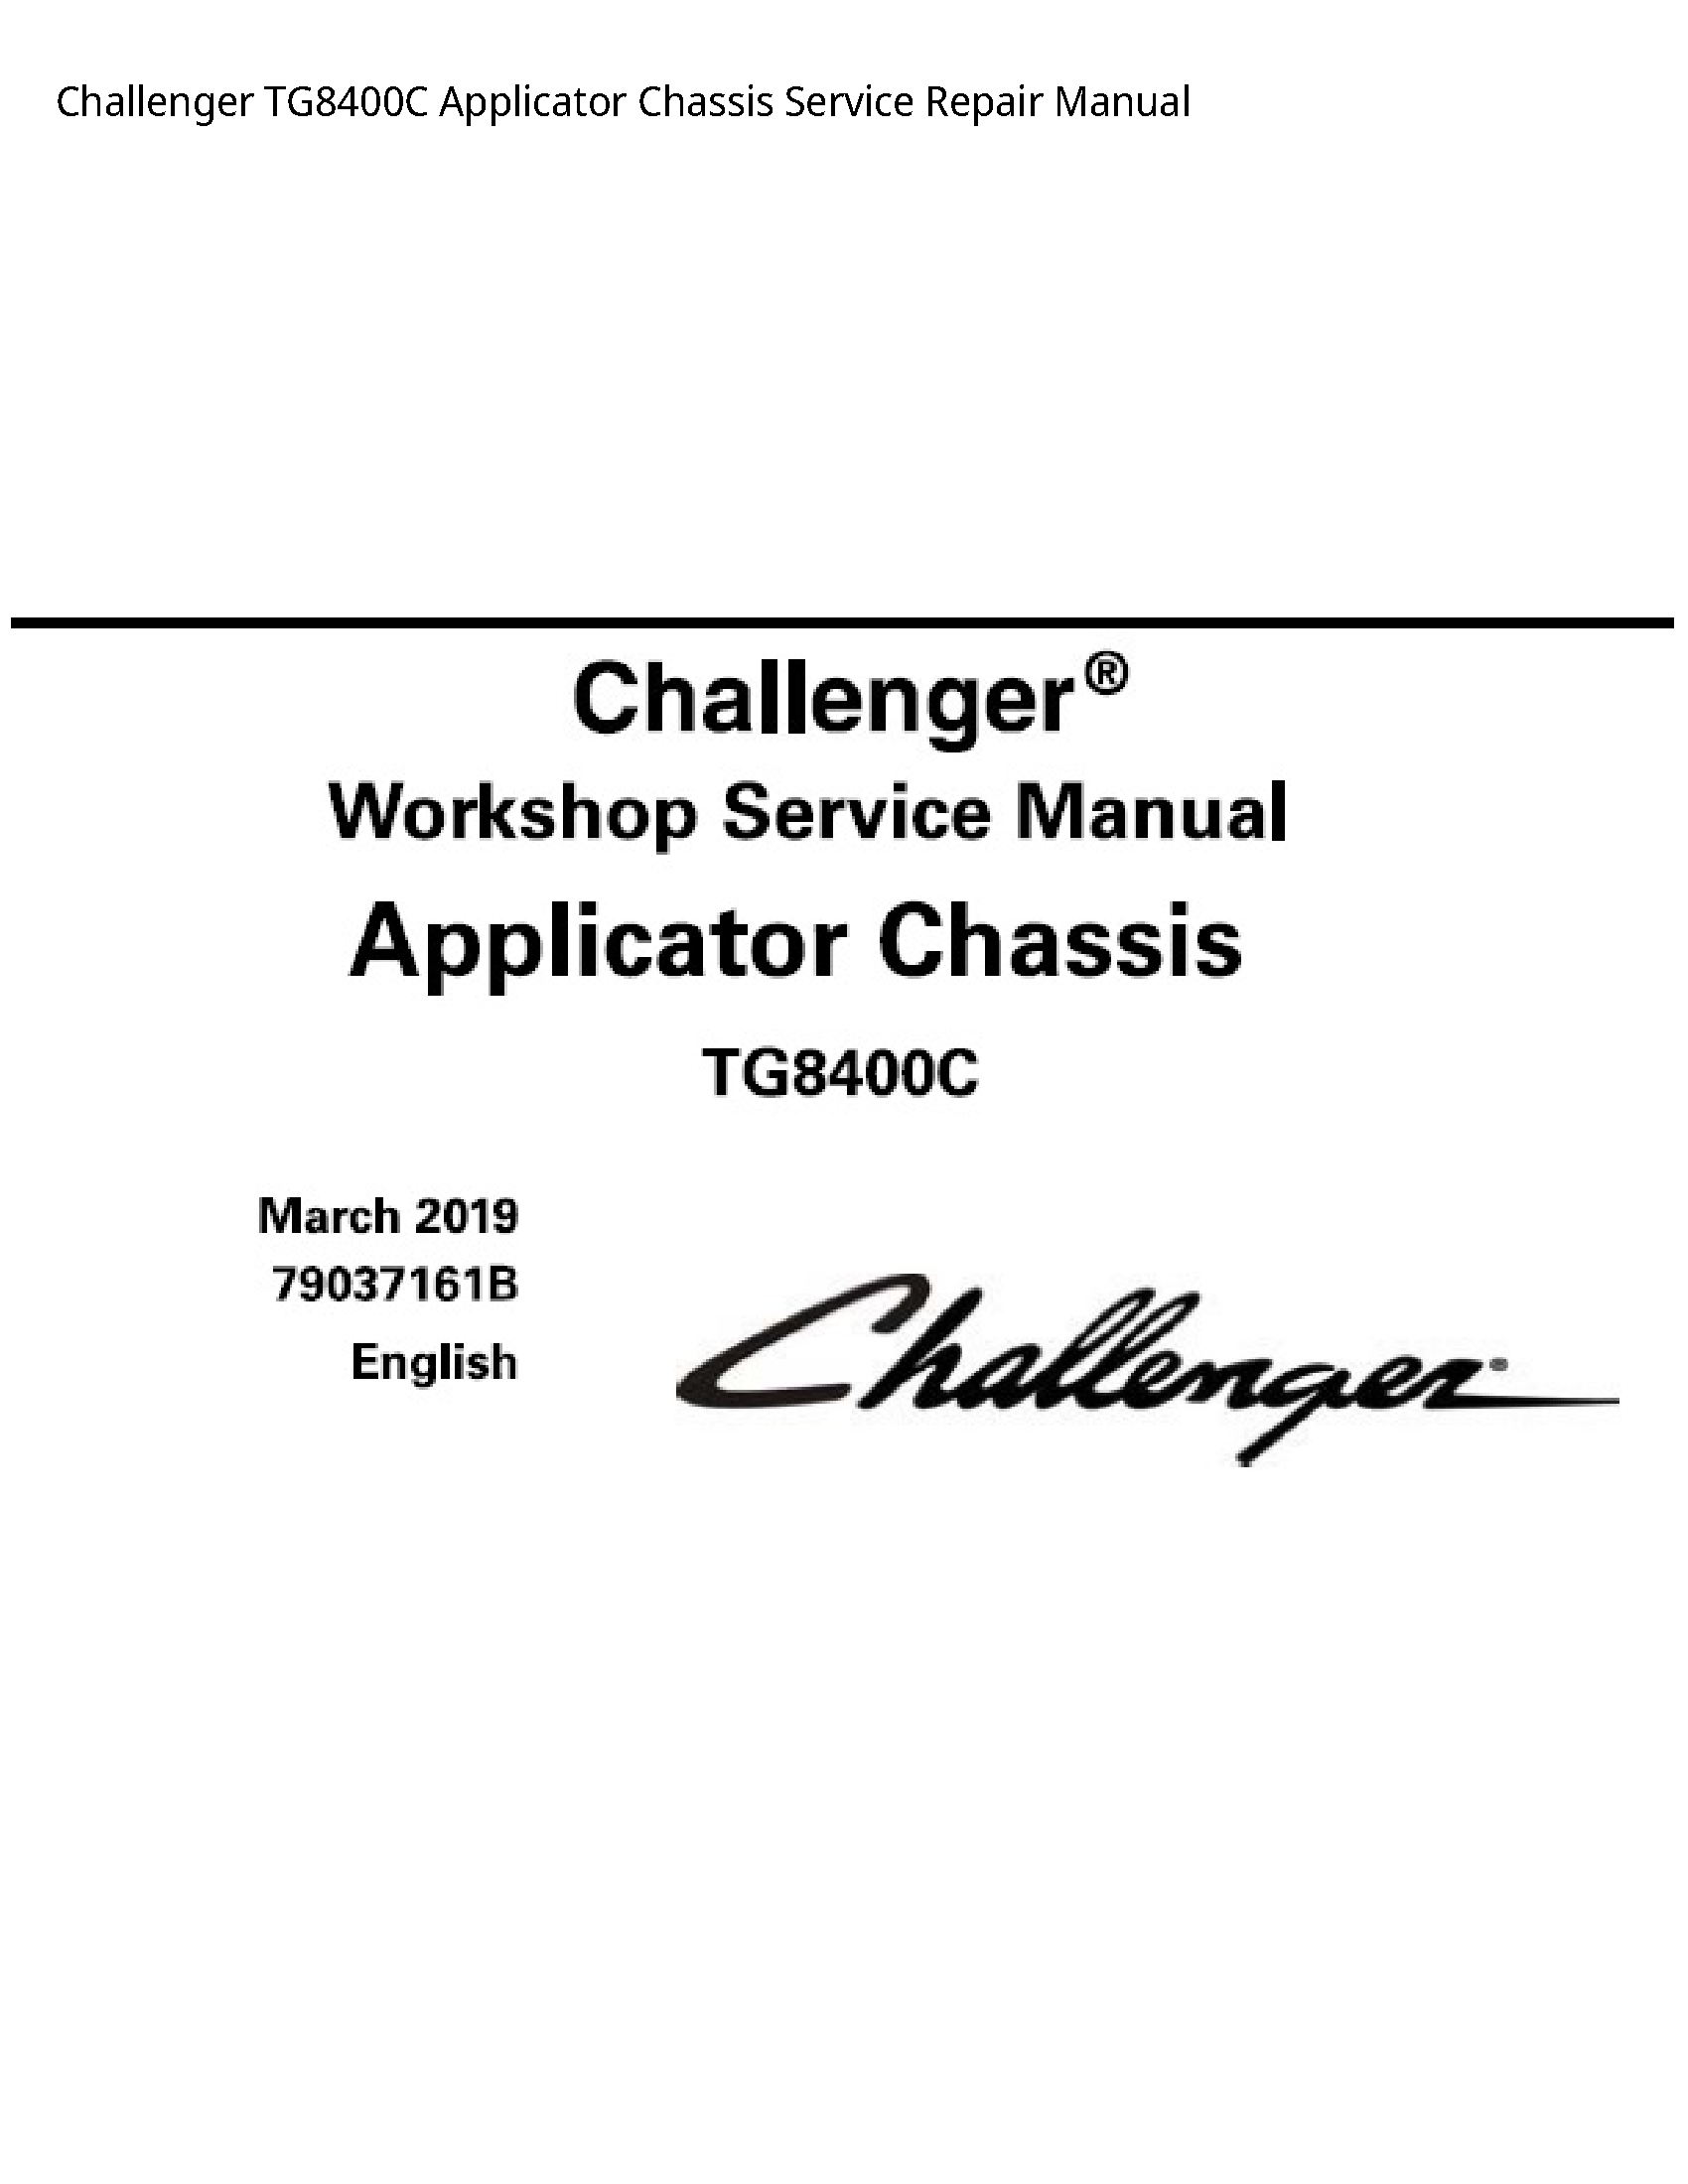 Challenger TG8400C Applicator Chassis manual